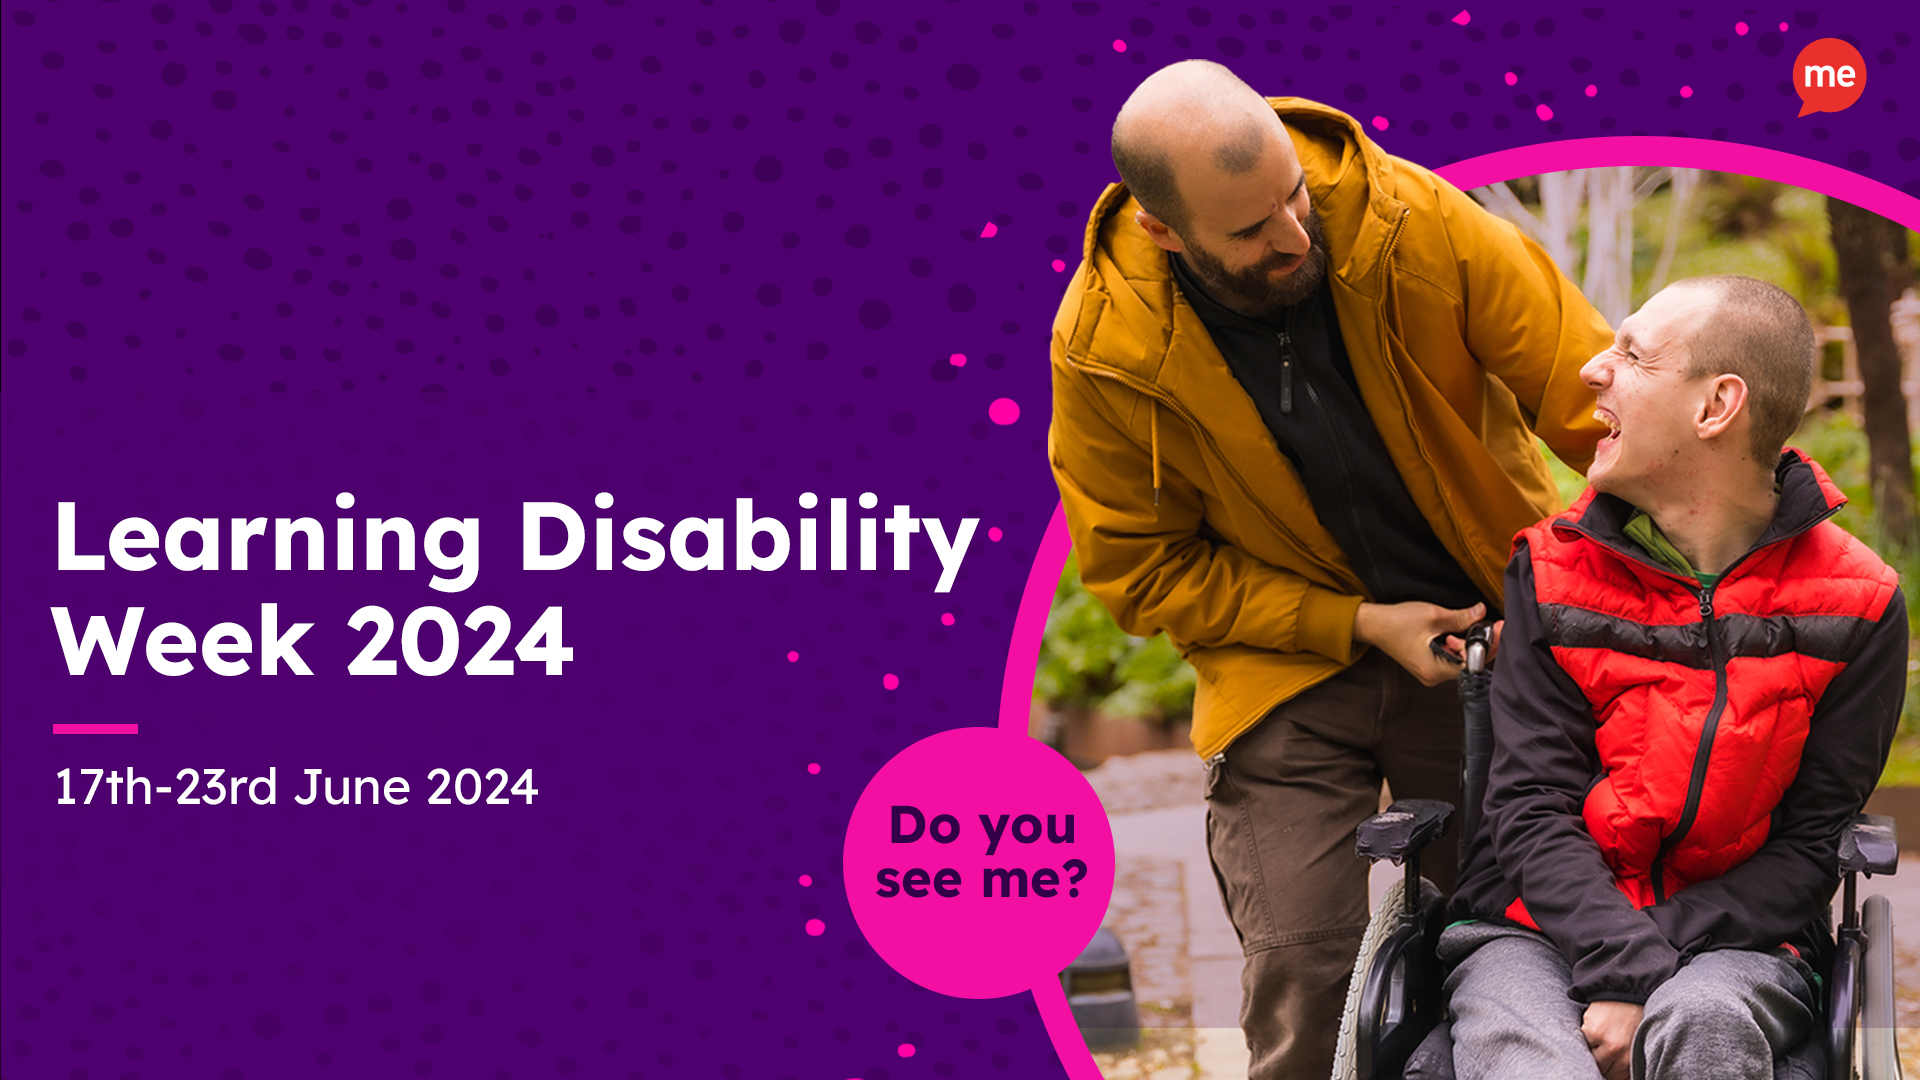 Learning Disability Week 2024, 17th-23rd June